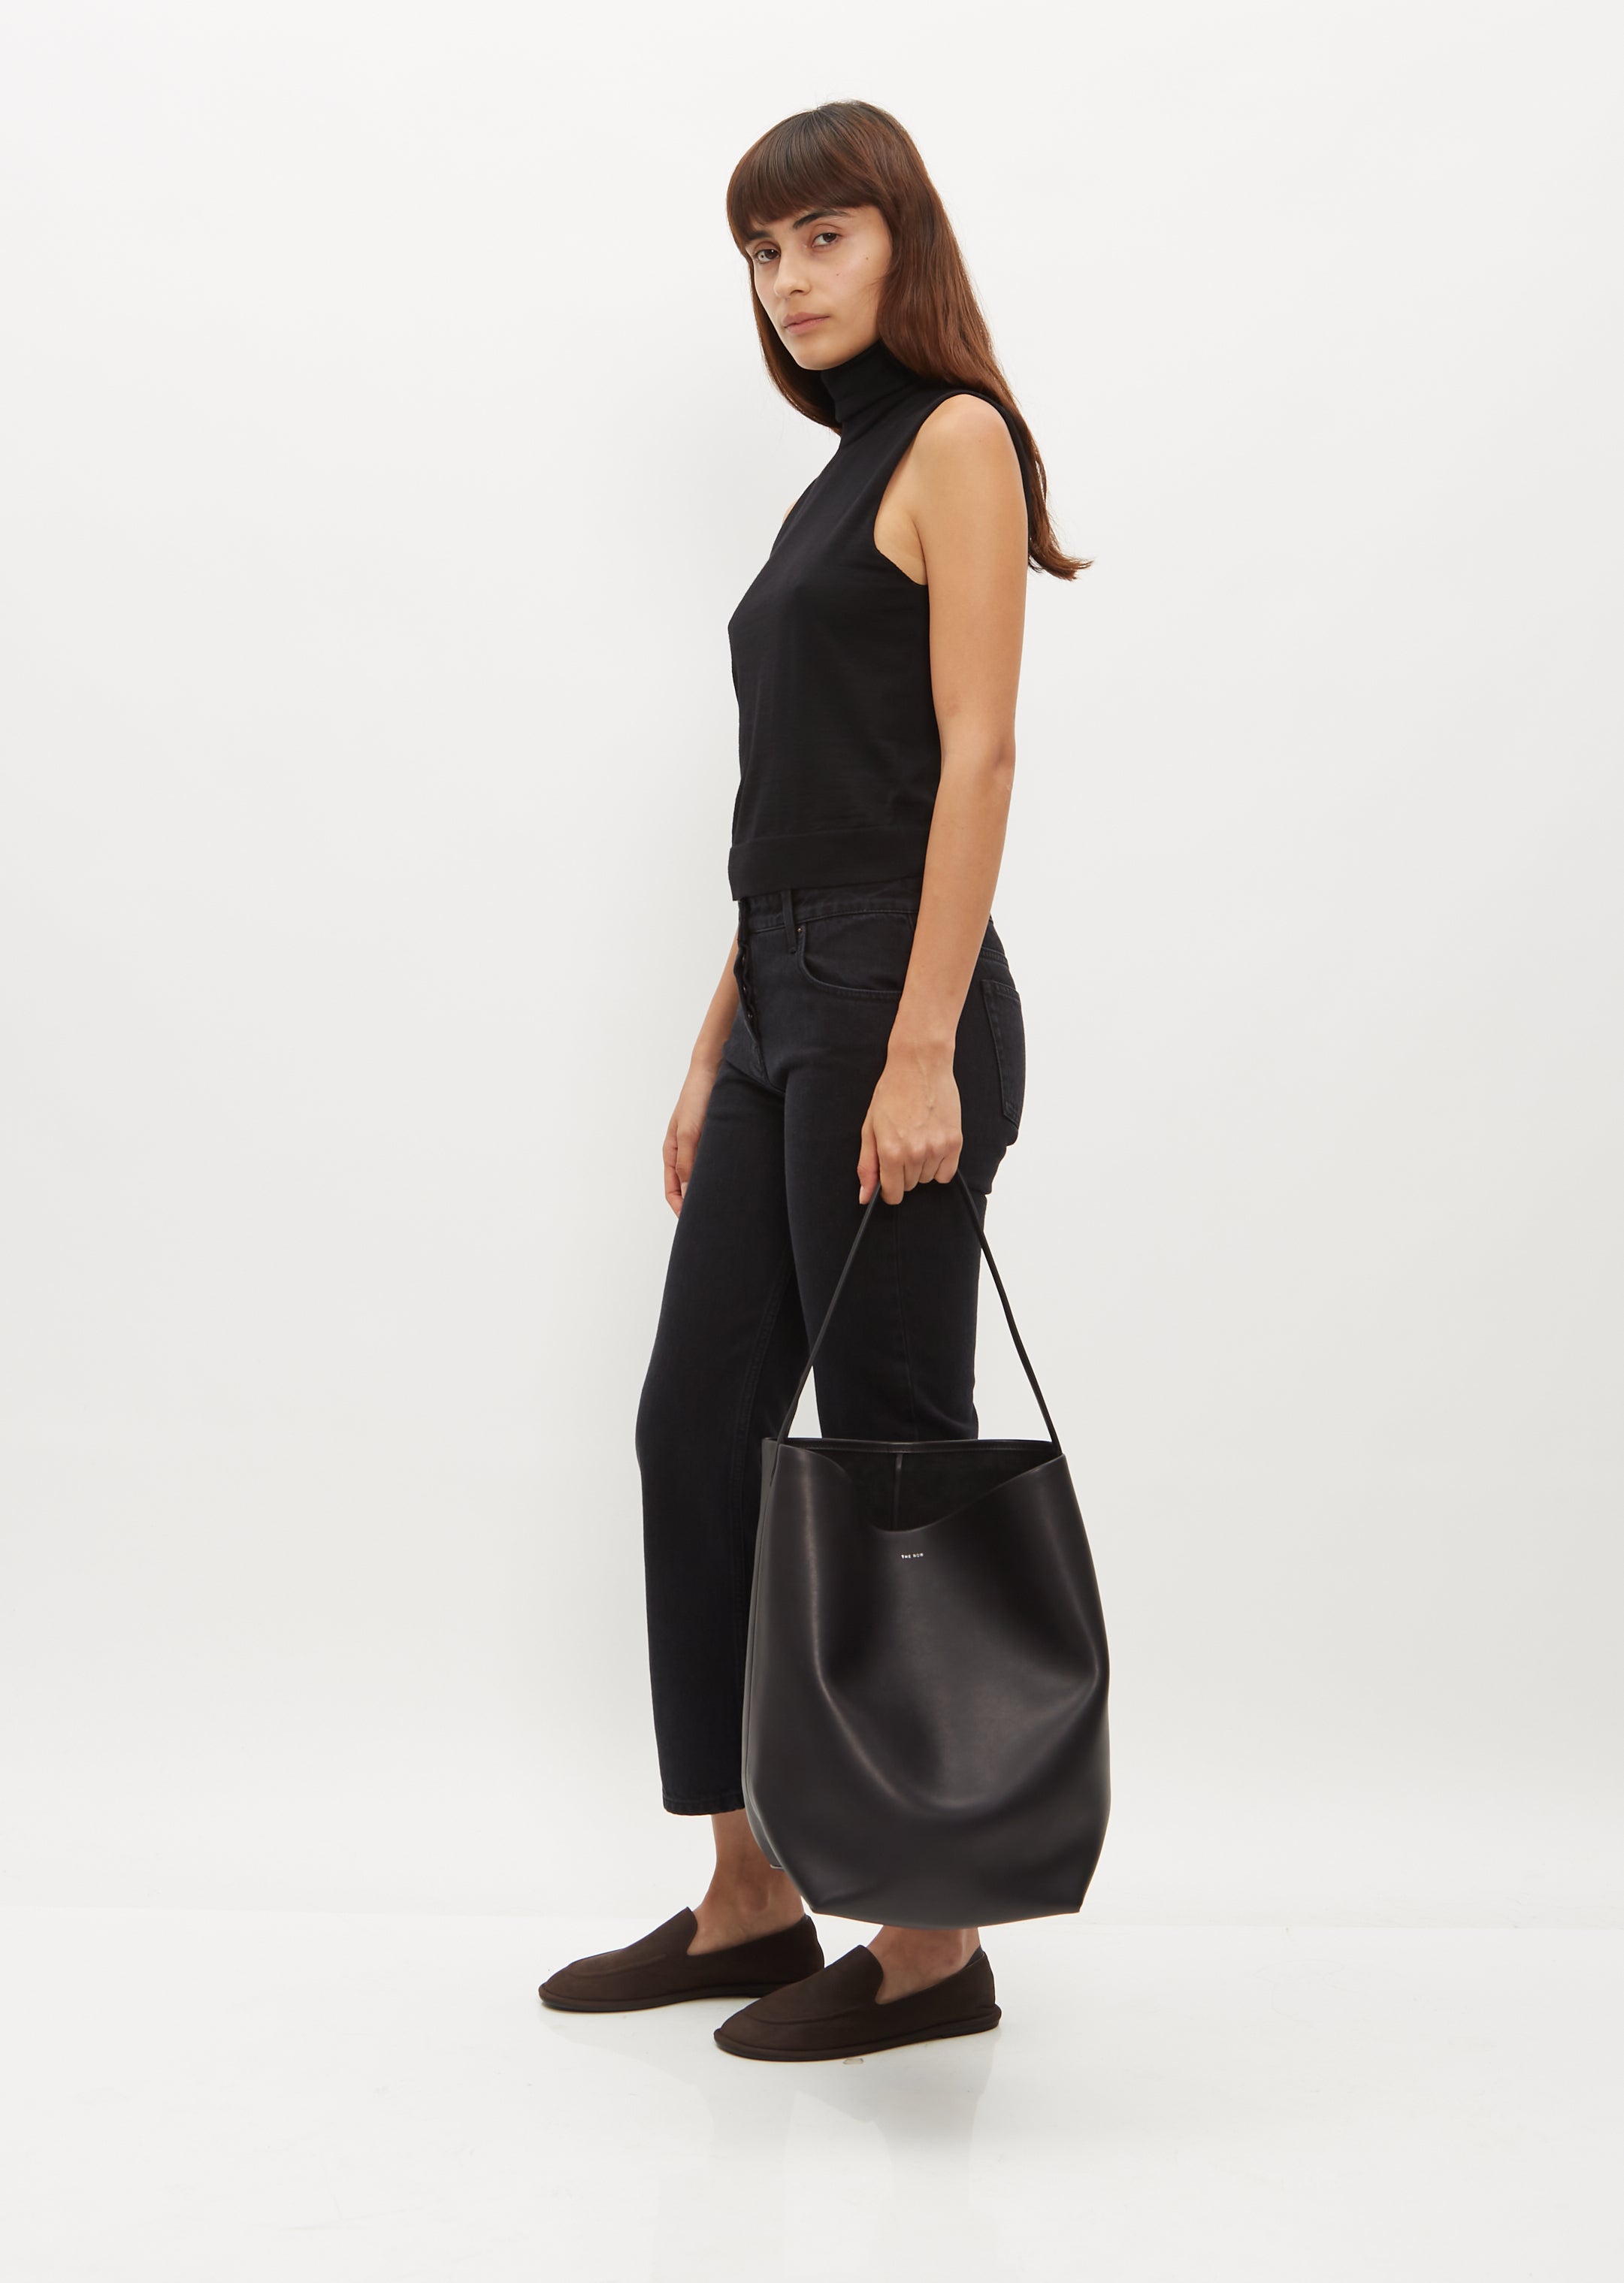 The Row Black Leather Park Tote